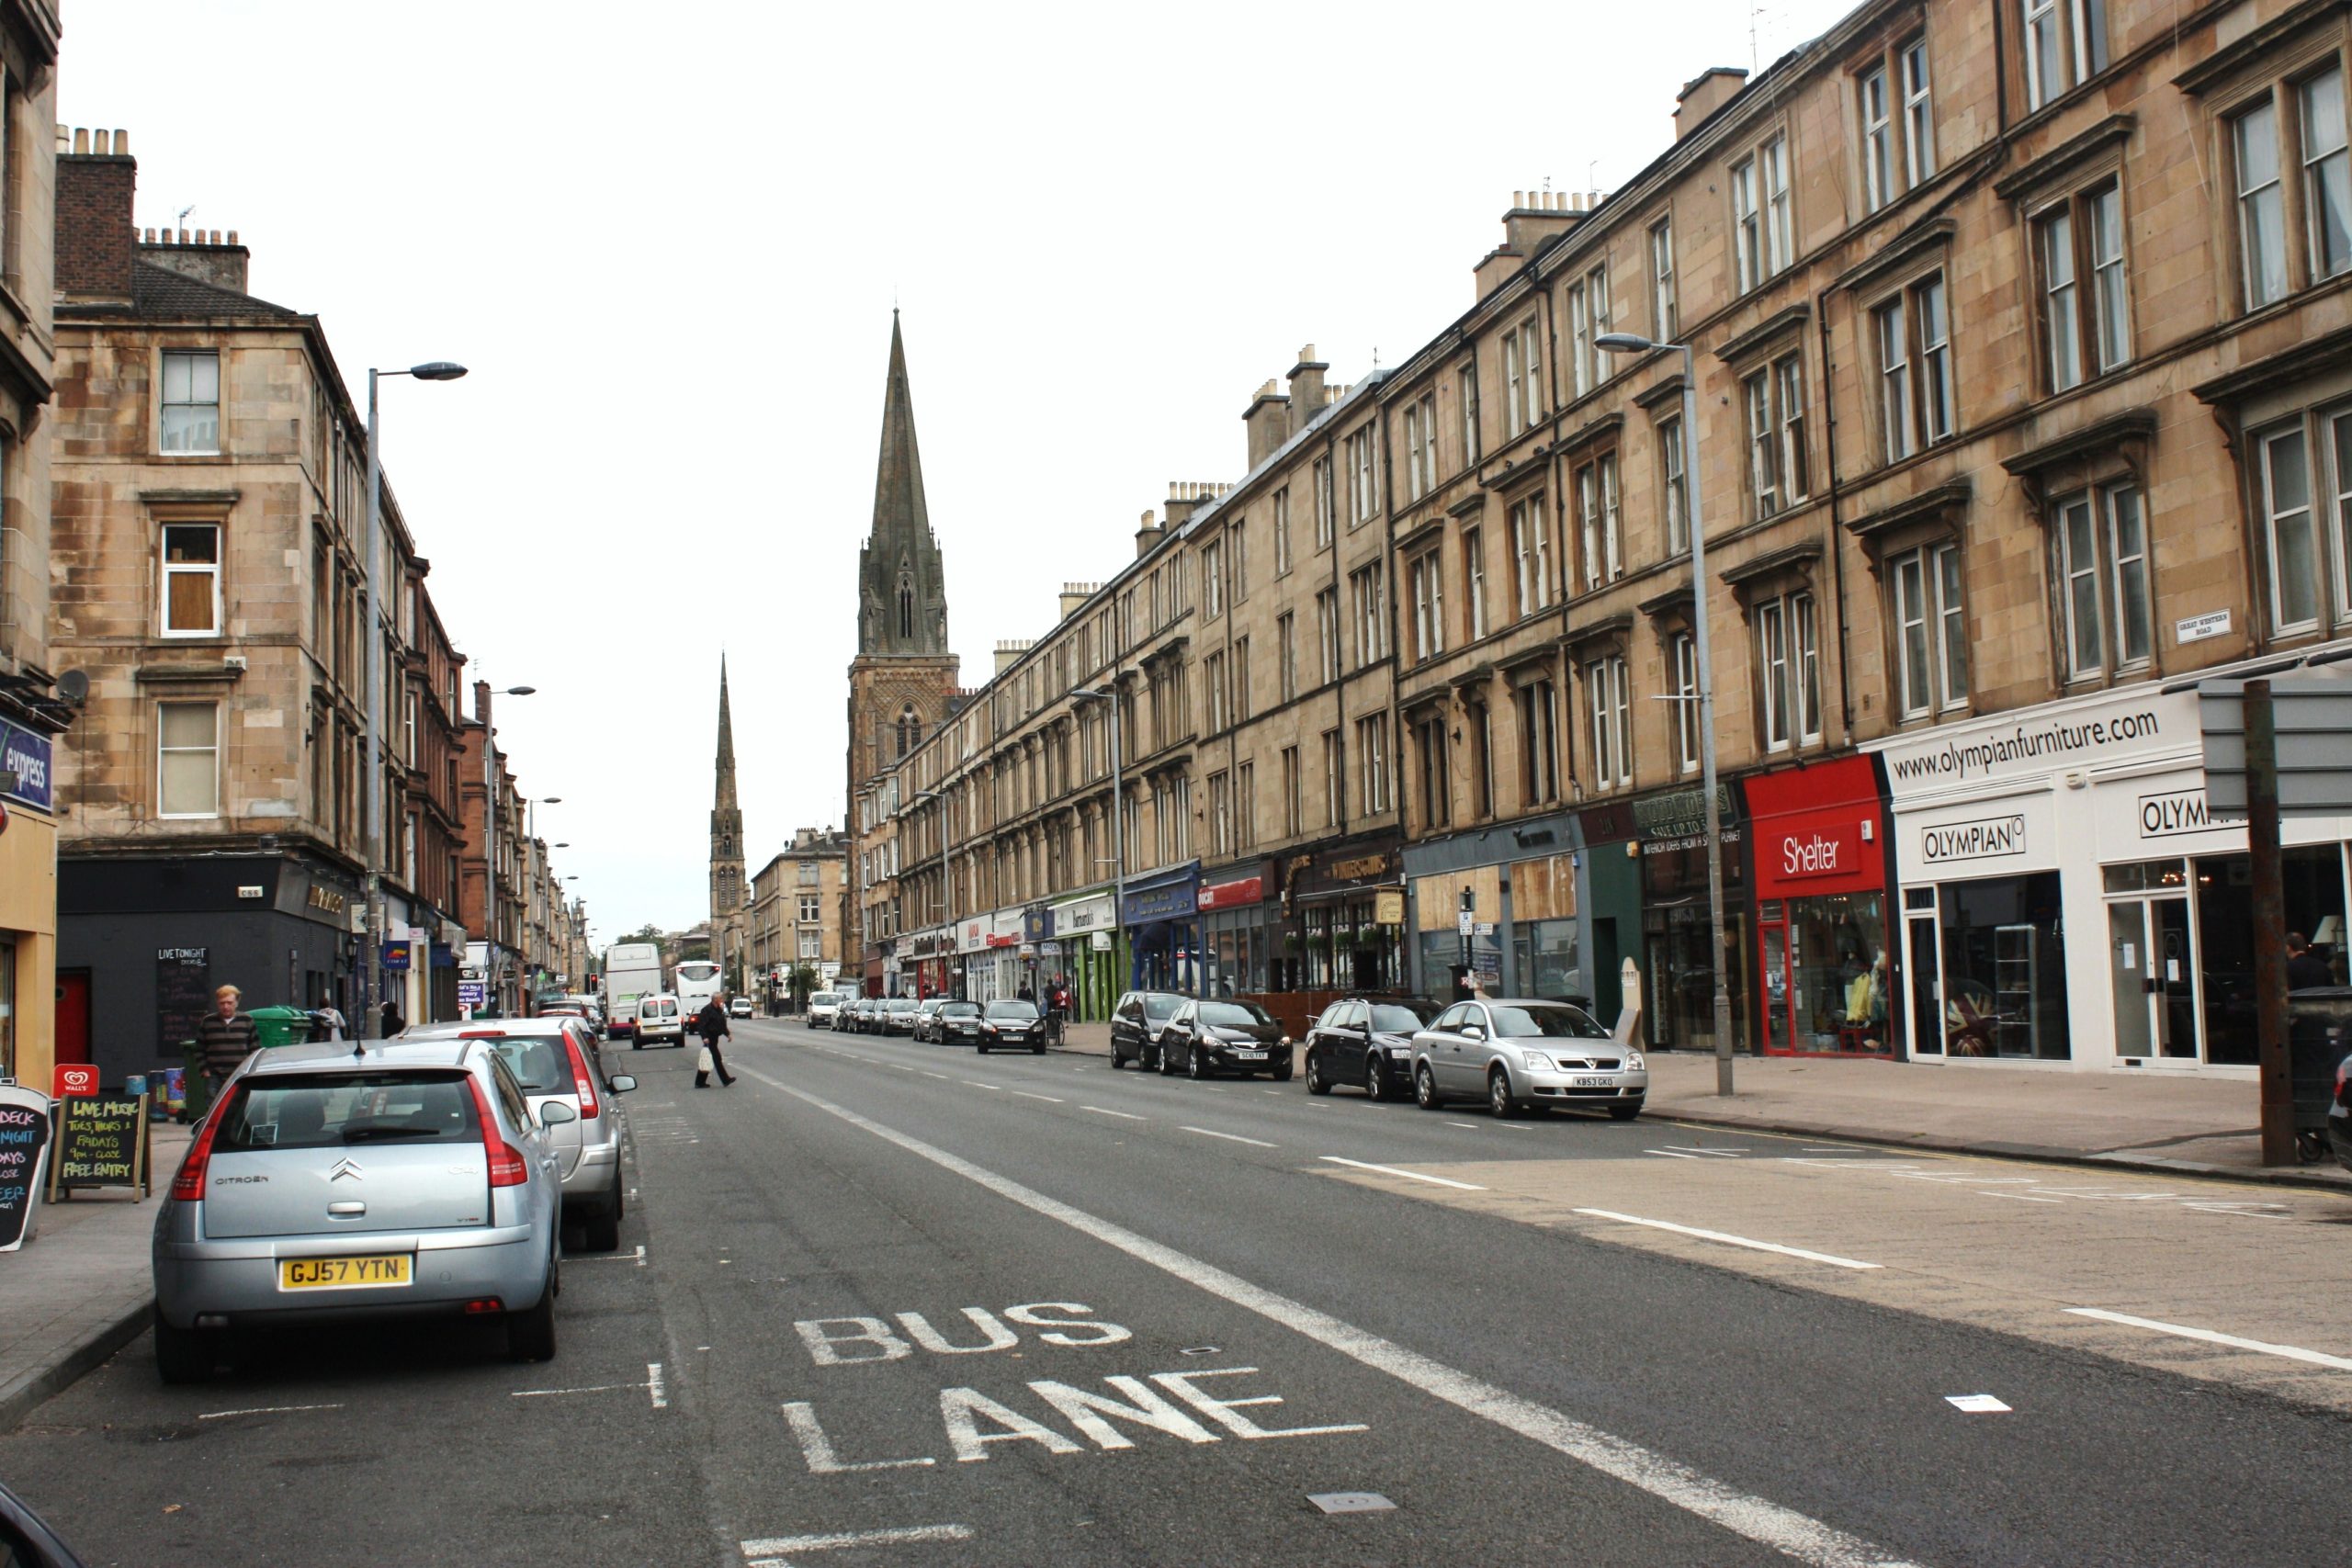 No, Glasgow is not “The UK’s first feminist city” (yet)